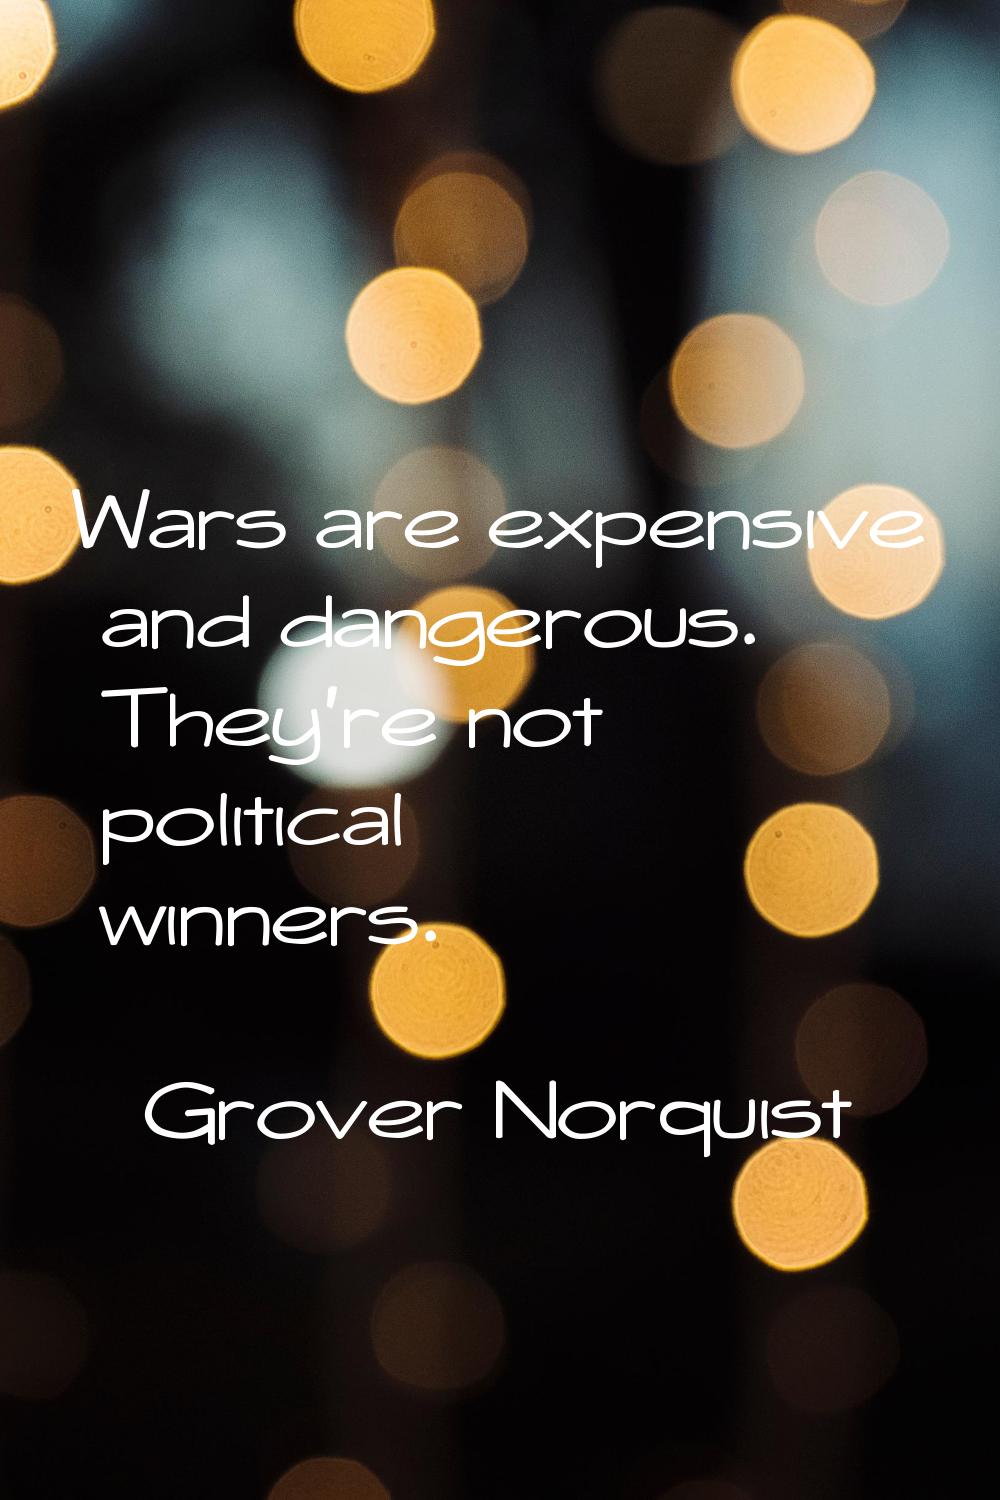 Wars are expensive and dangerous. They're not political winners.